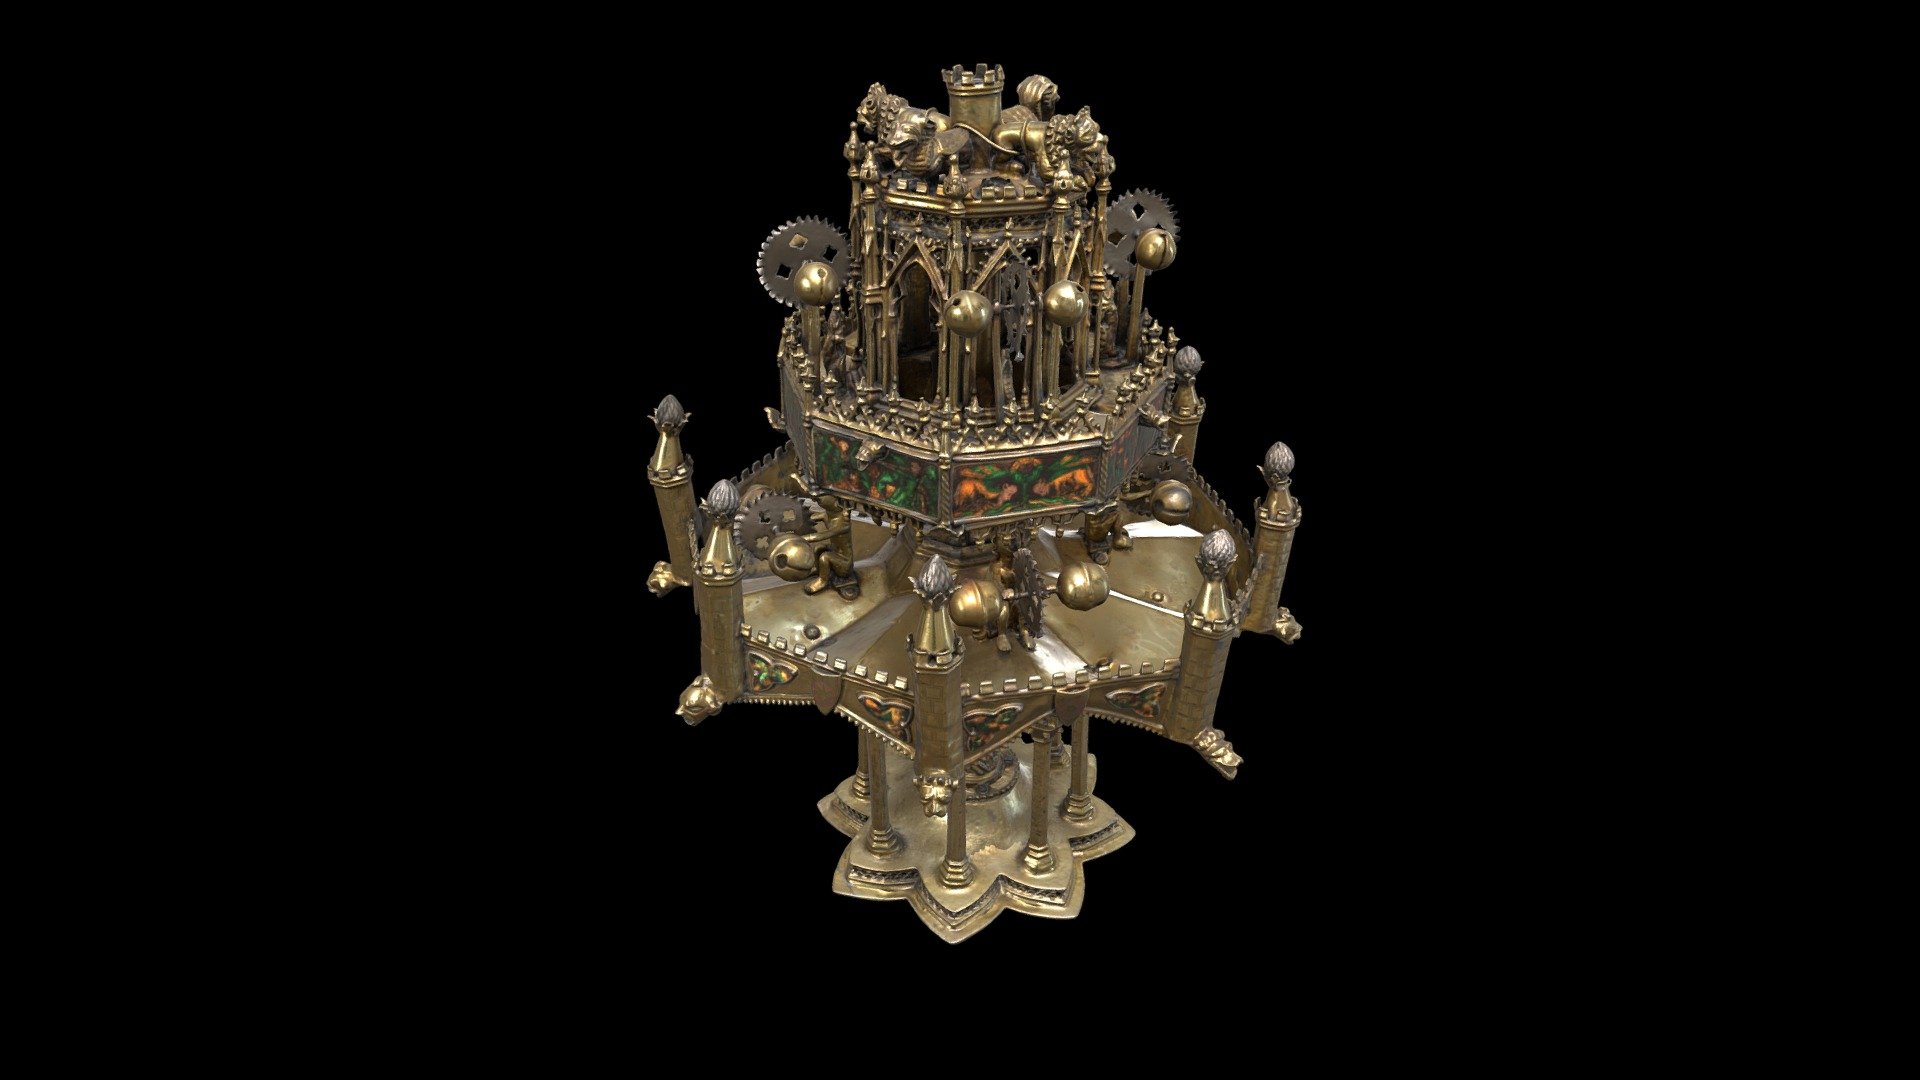 You can copy, modify, and distribute this work, even for commercial purposes, all without asking permission. Learn more about The Cleveland Museum of Art’s Open Access initiative: http://www.clevelandart.org/open-access-faqs

Table Fountain, c. 1320–40. France, Paris, 14th century. Gilt-silver and translucent enamels; overall: 33.8 x 25.4 x 26 cm (13 5/16 x 10 x 10 1/4 in.). The Cleveland Museum of Art, Gift of J. H. Wade 1924.859

Learn more on The Cleveland Museum of Art’s Collection Online: https://www.clevelandart.org/art/1924.859 - 1924.859 Table Fountain - Download Free 3D model by Cleveland Museum of Art (@clevelandart) 3d model